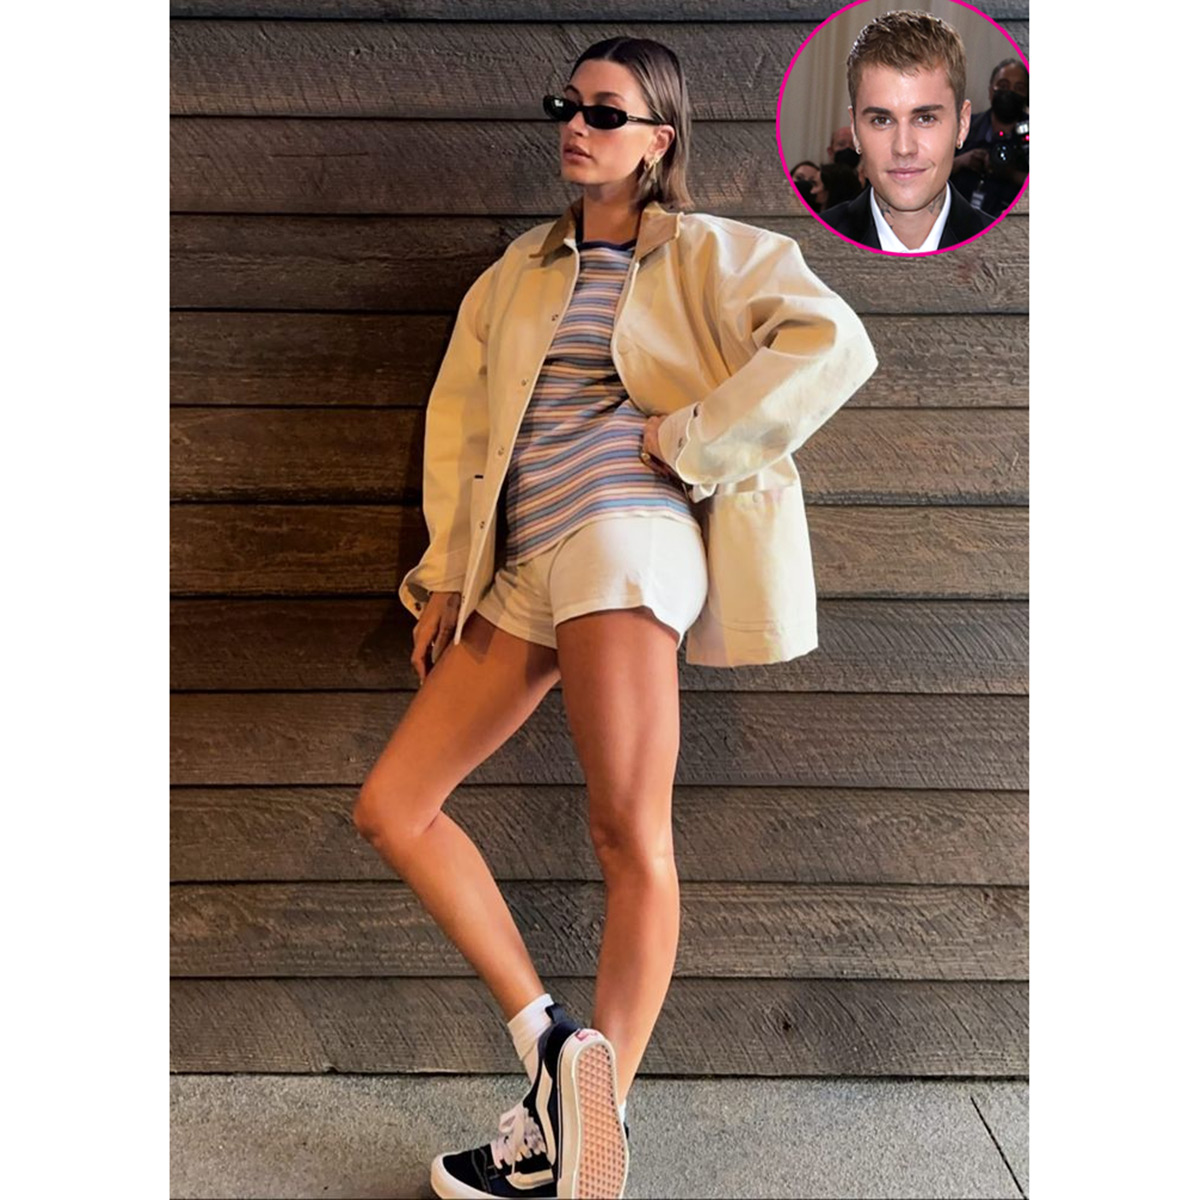 Hailey Bieber's Street Style Outfits Have This One Quality In Common